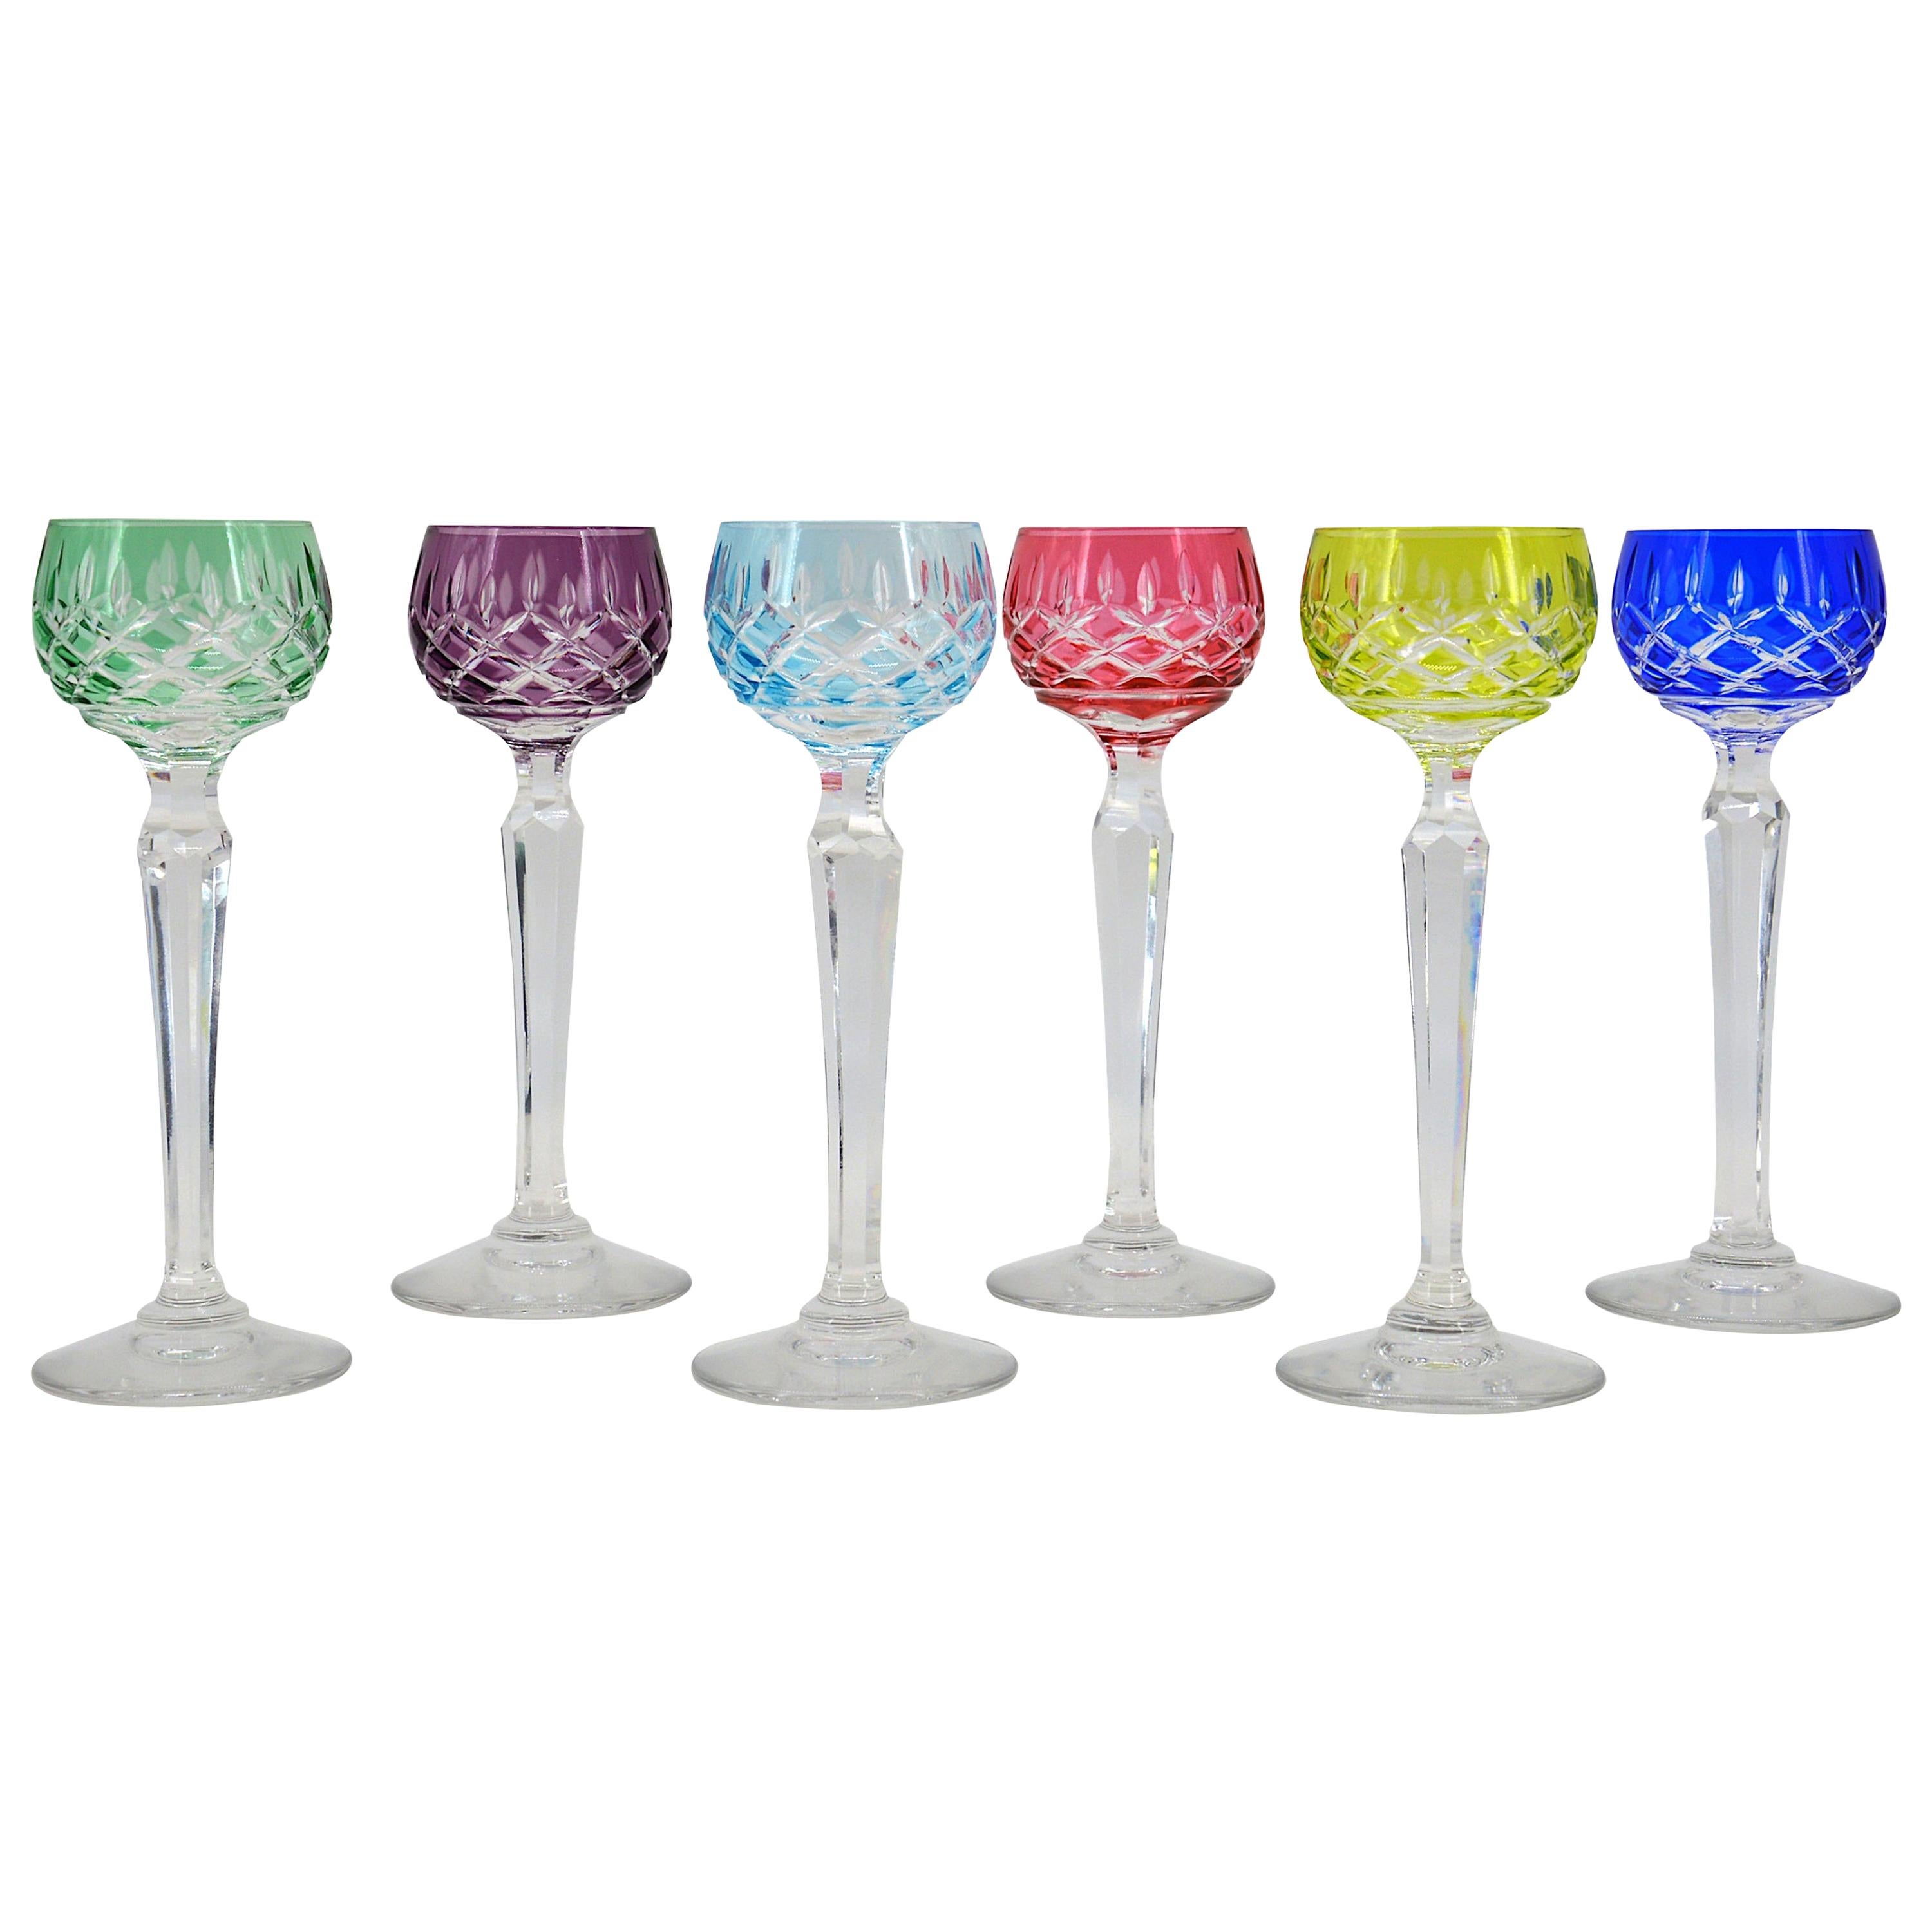 Set of 6 colored crystal glasses by Cristallerie Lorraine de Lemberg, France, 1920s. In their original box. These glasses were handcut at the Lorraine factory in Lemberg in the late 1920s. They can be used for aperitif as well as for the digestive.